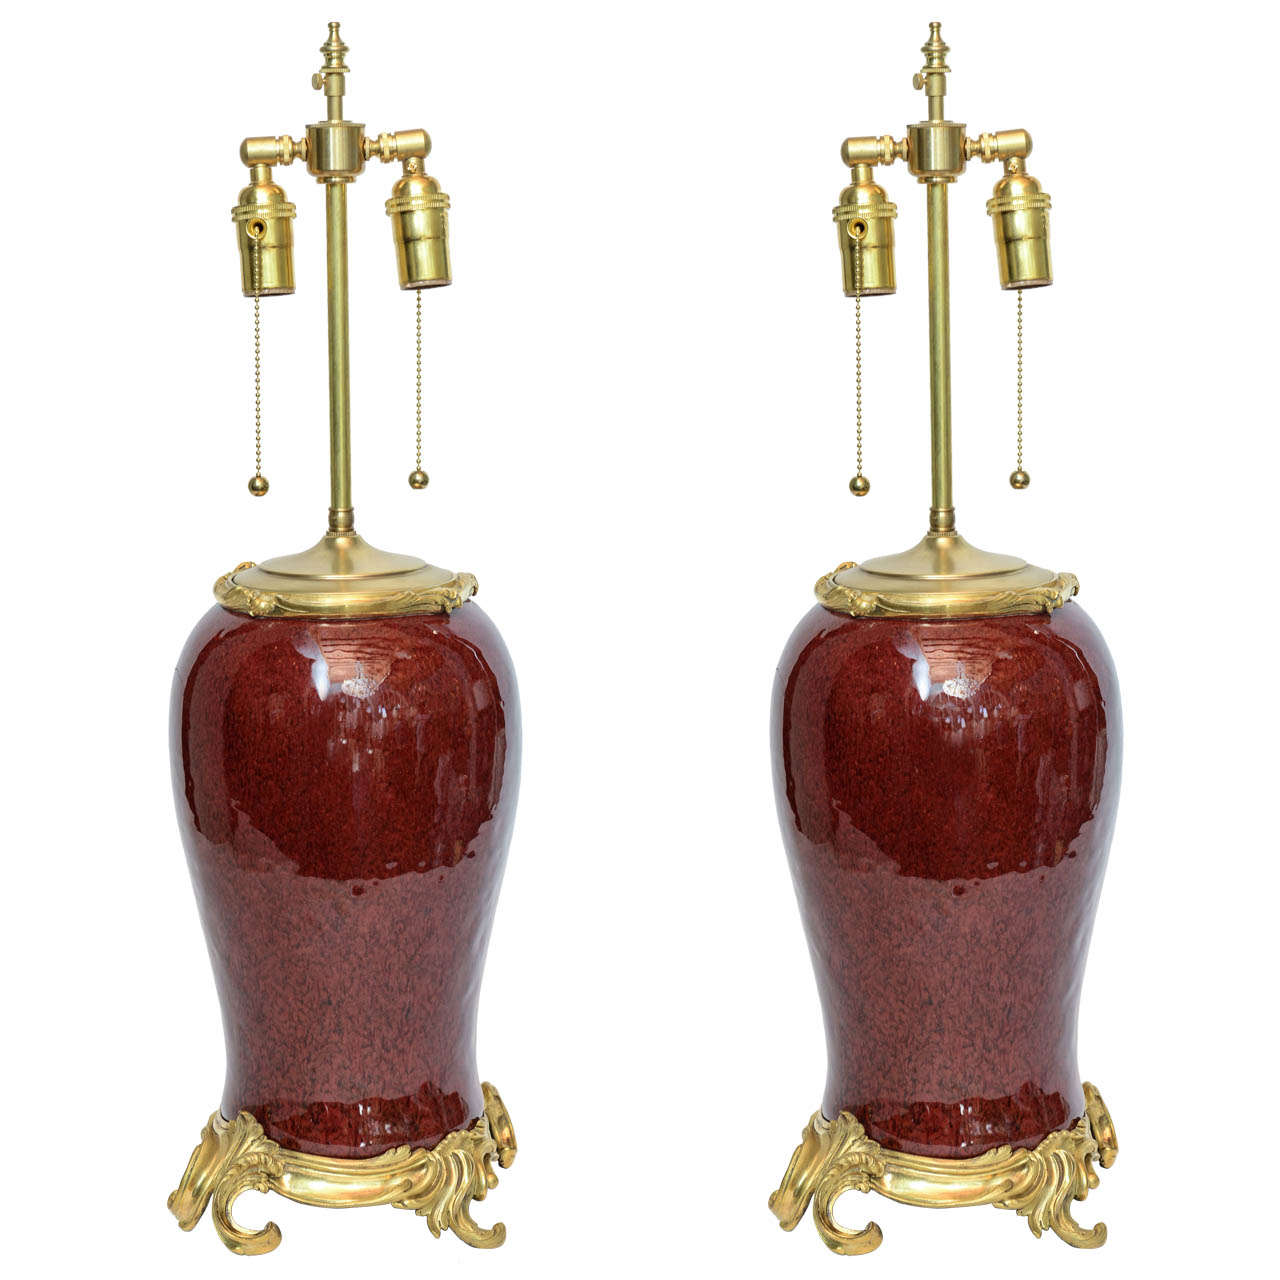 A pair of French bronze-mounted Chinese oxblood porcelain vases. Porcelain is from 18th century and mounts are from 19th century. Measures: Height 16